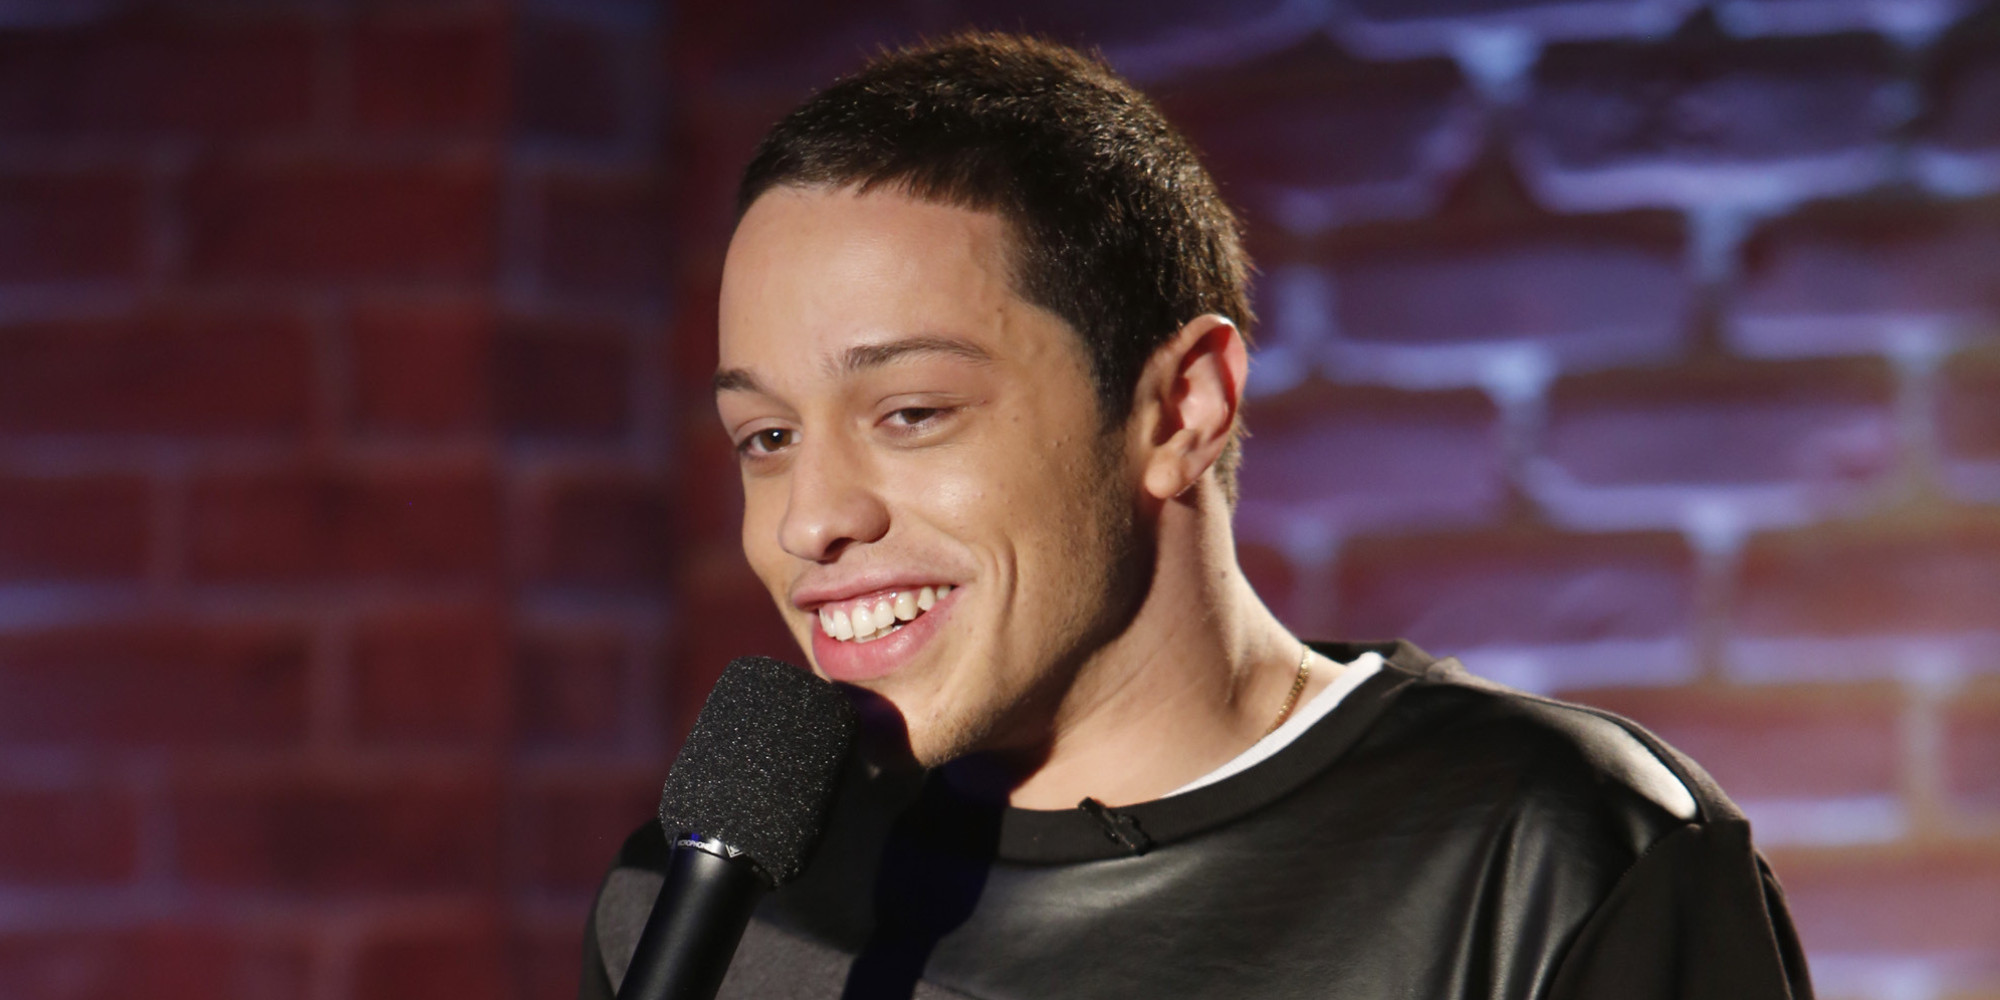 Pete Davidson / Pete Davidson Deletes All Social Media Following Troubling ... / He was raised on staten island, new york, and is the son of amy (waters) and scott matthew davidson.